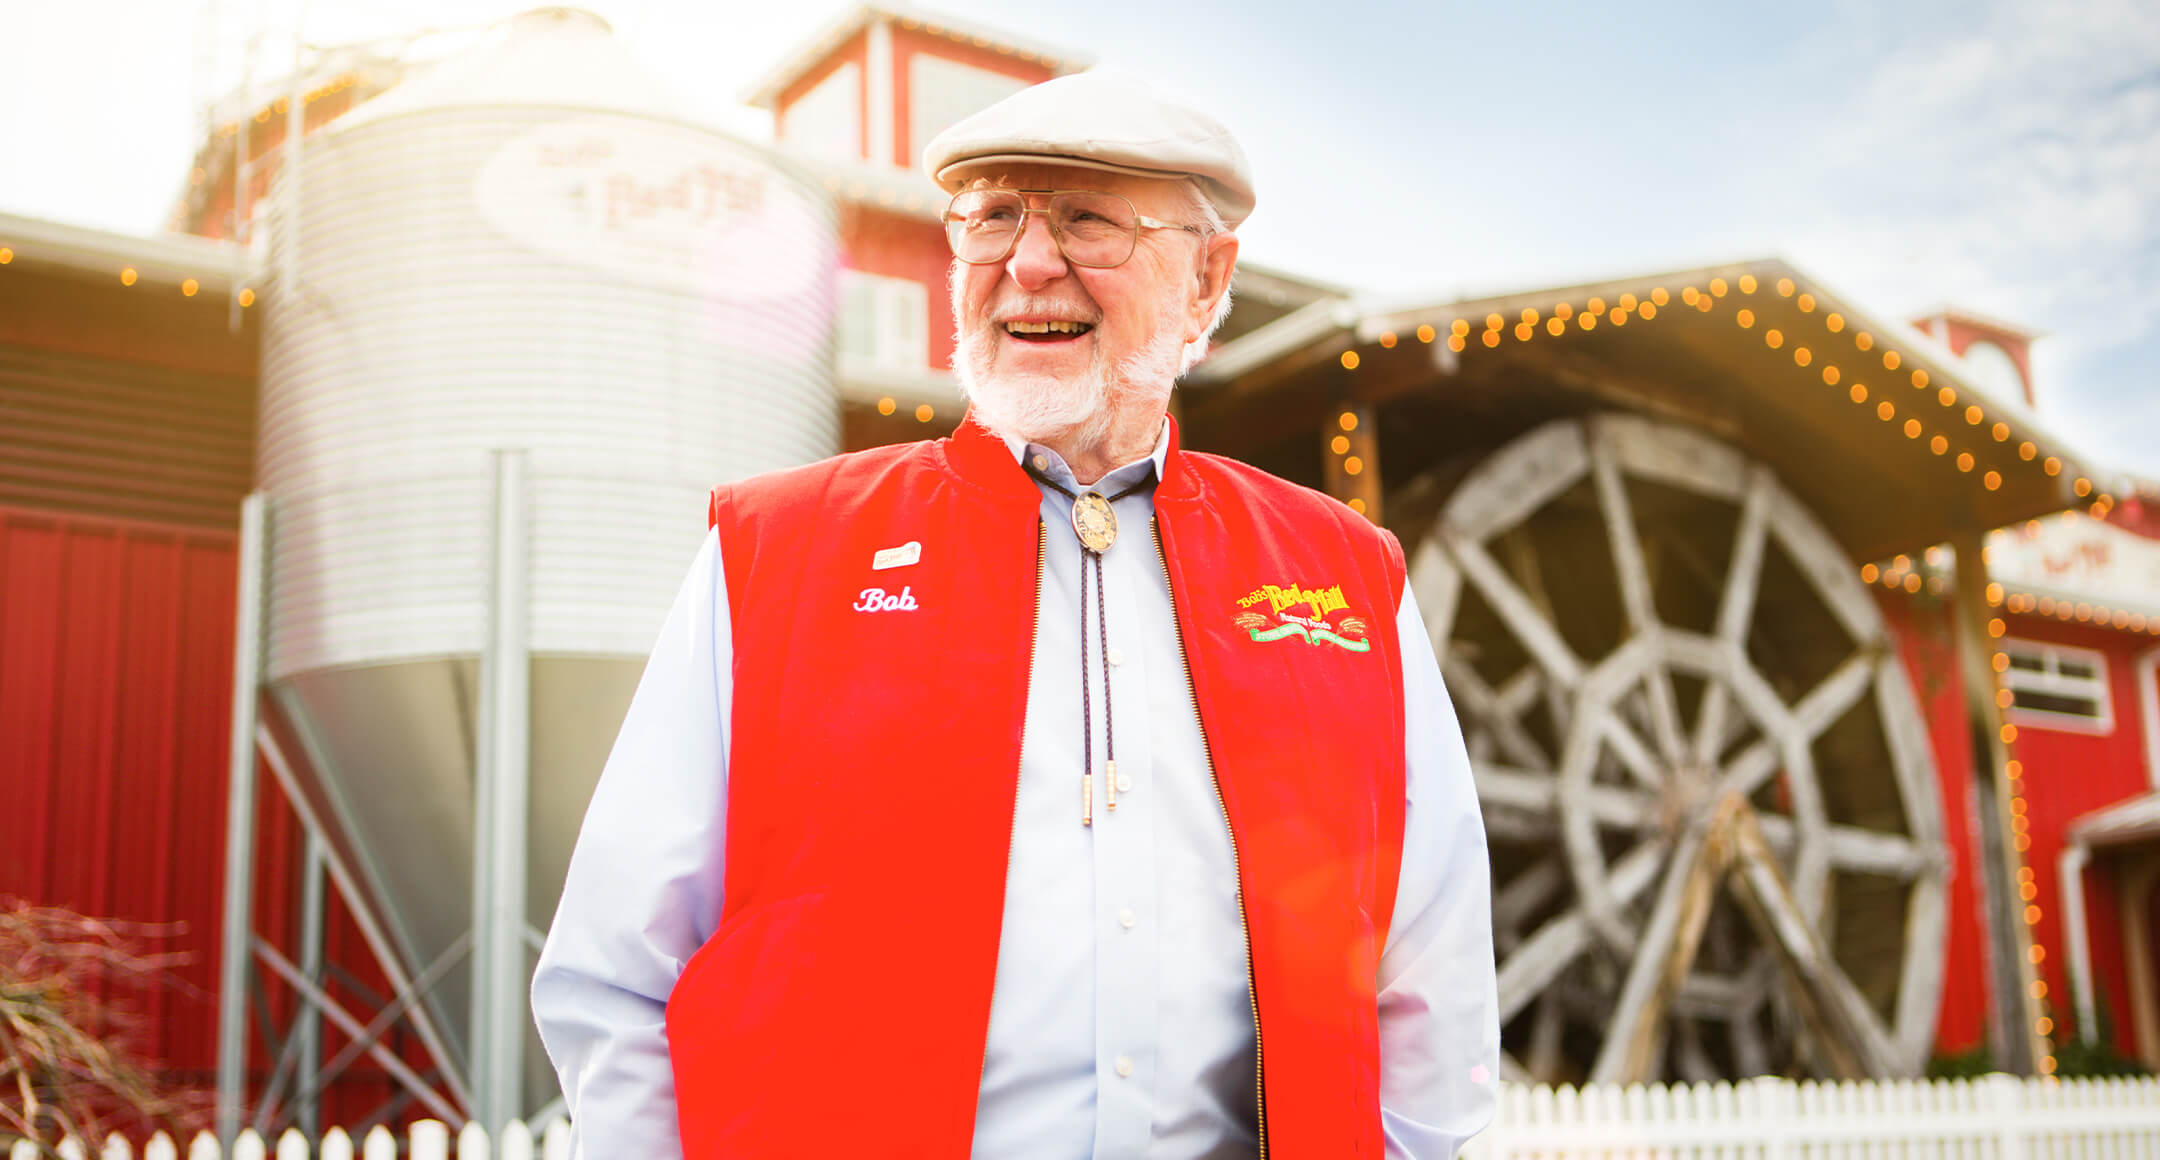 Bob’s Red Mill: Good for People and the Planet 